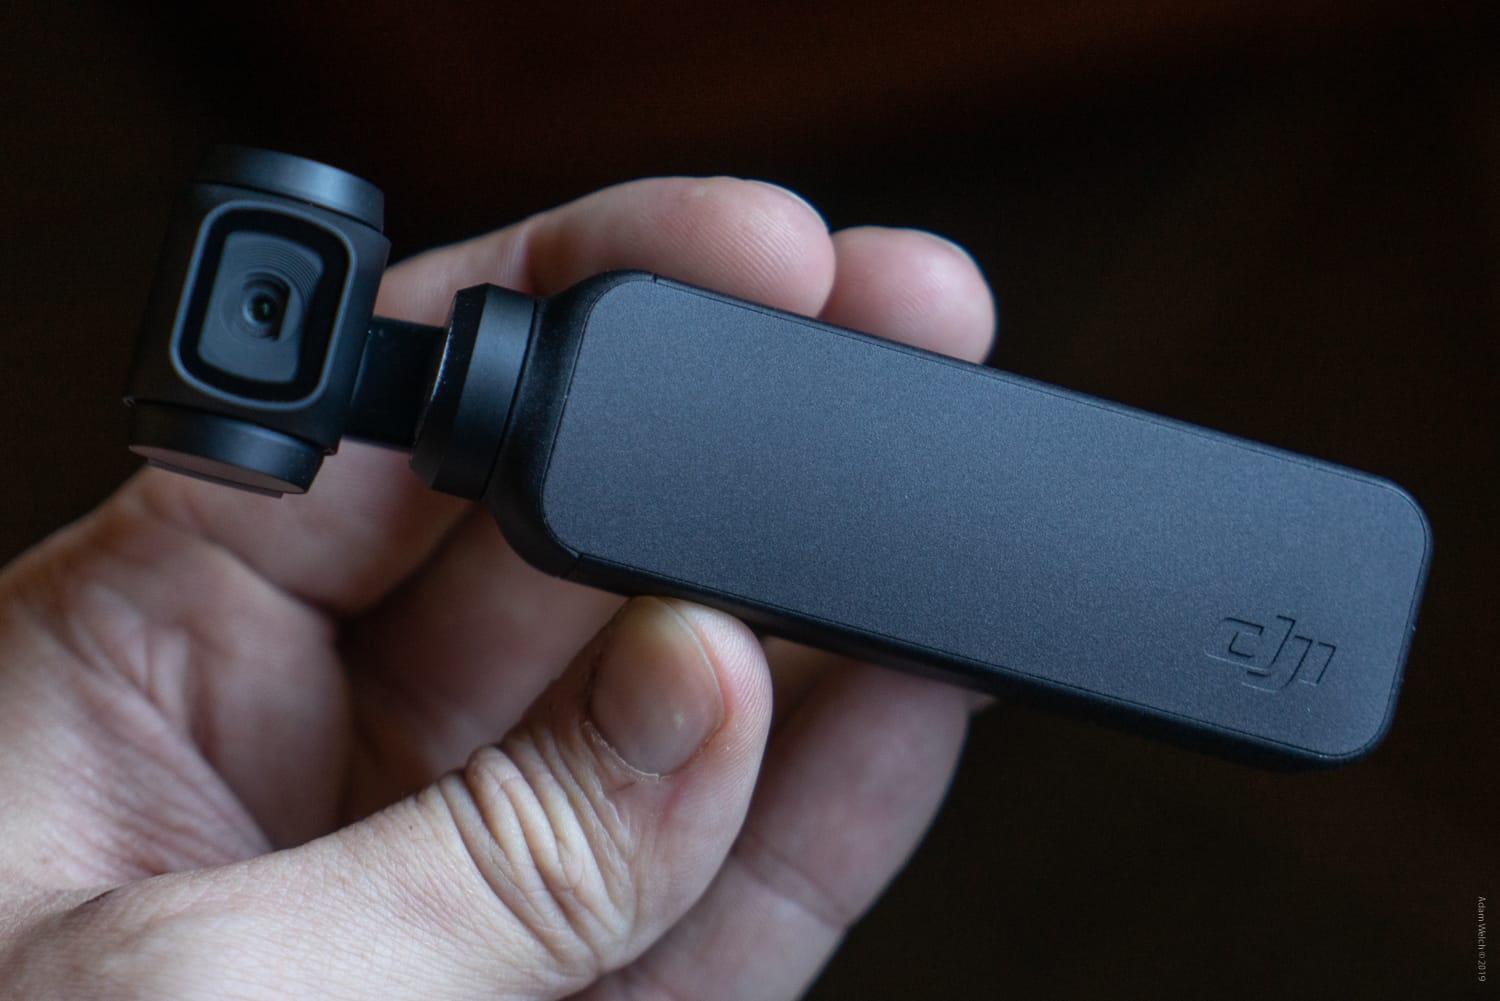 DJI Osmo Pocket review: a 4K hand camera that's in a class of its own